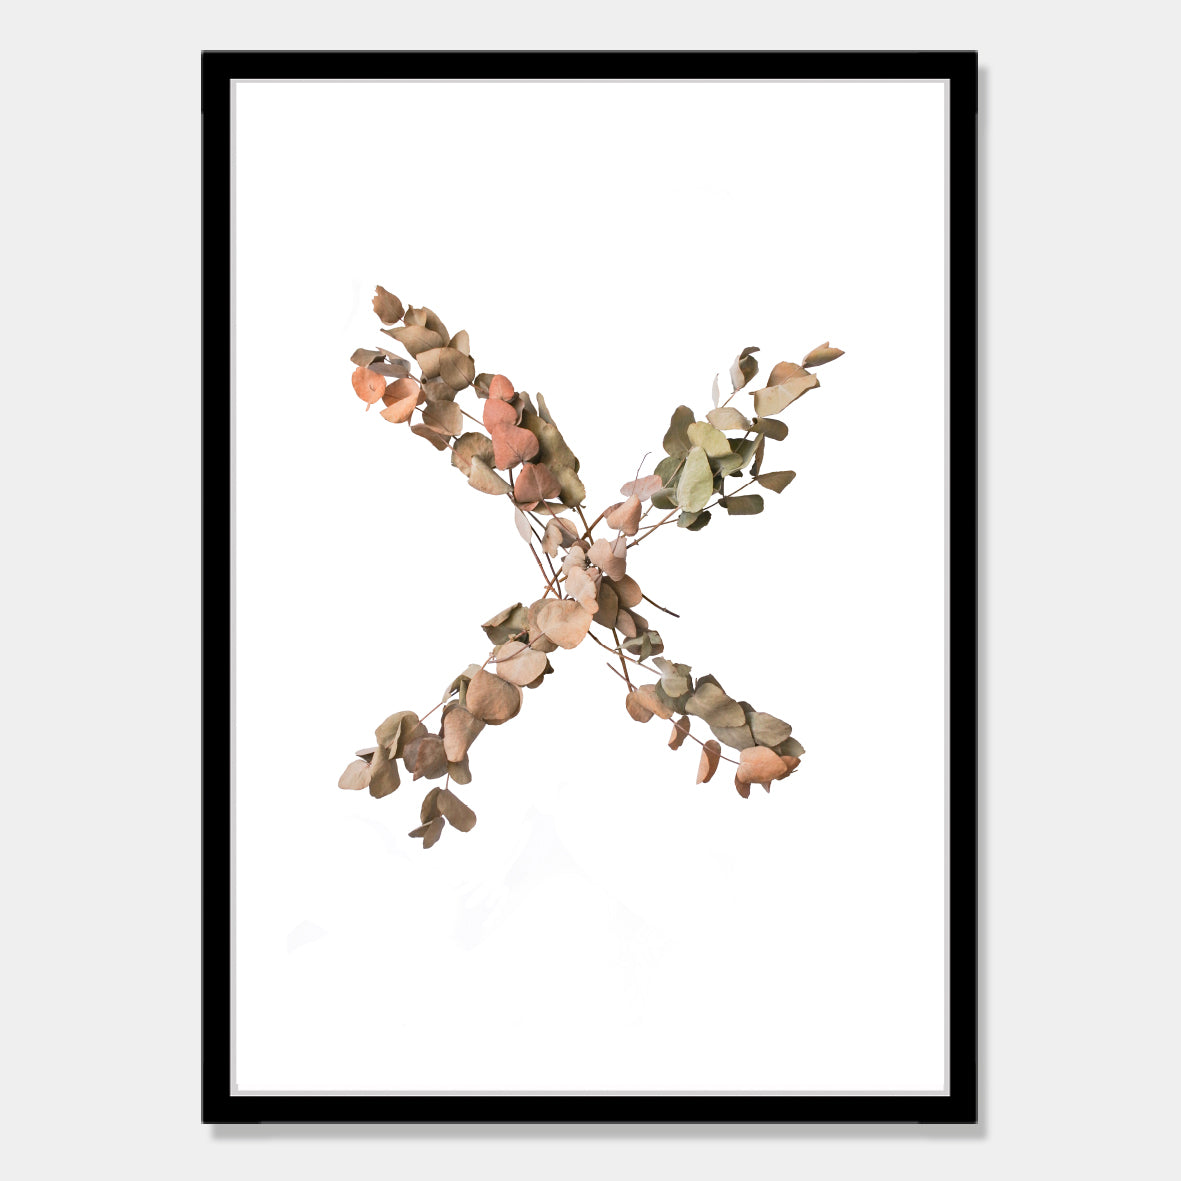 Photographic art print of dried leaves in a X shape by Bon Jung. Printed in New Zealand by endemicworld and framed in black.